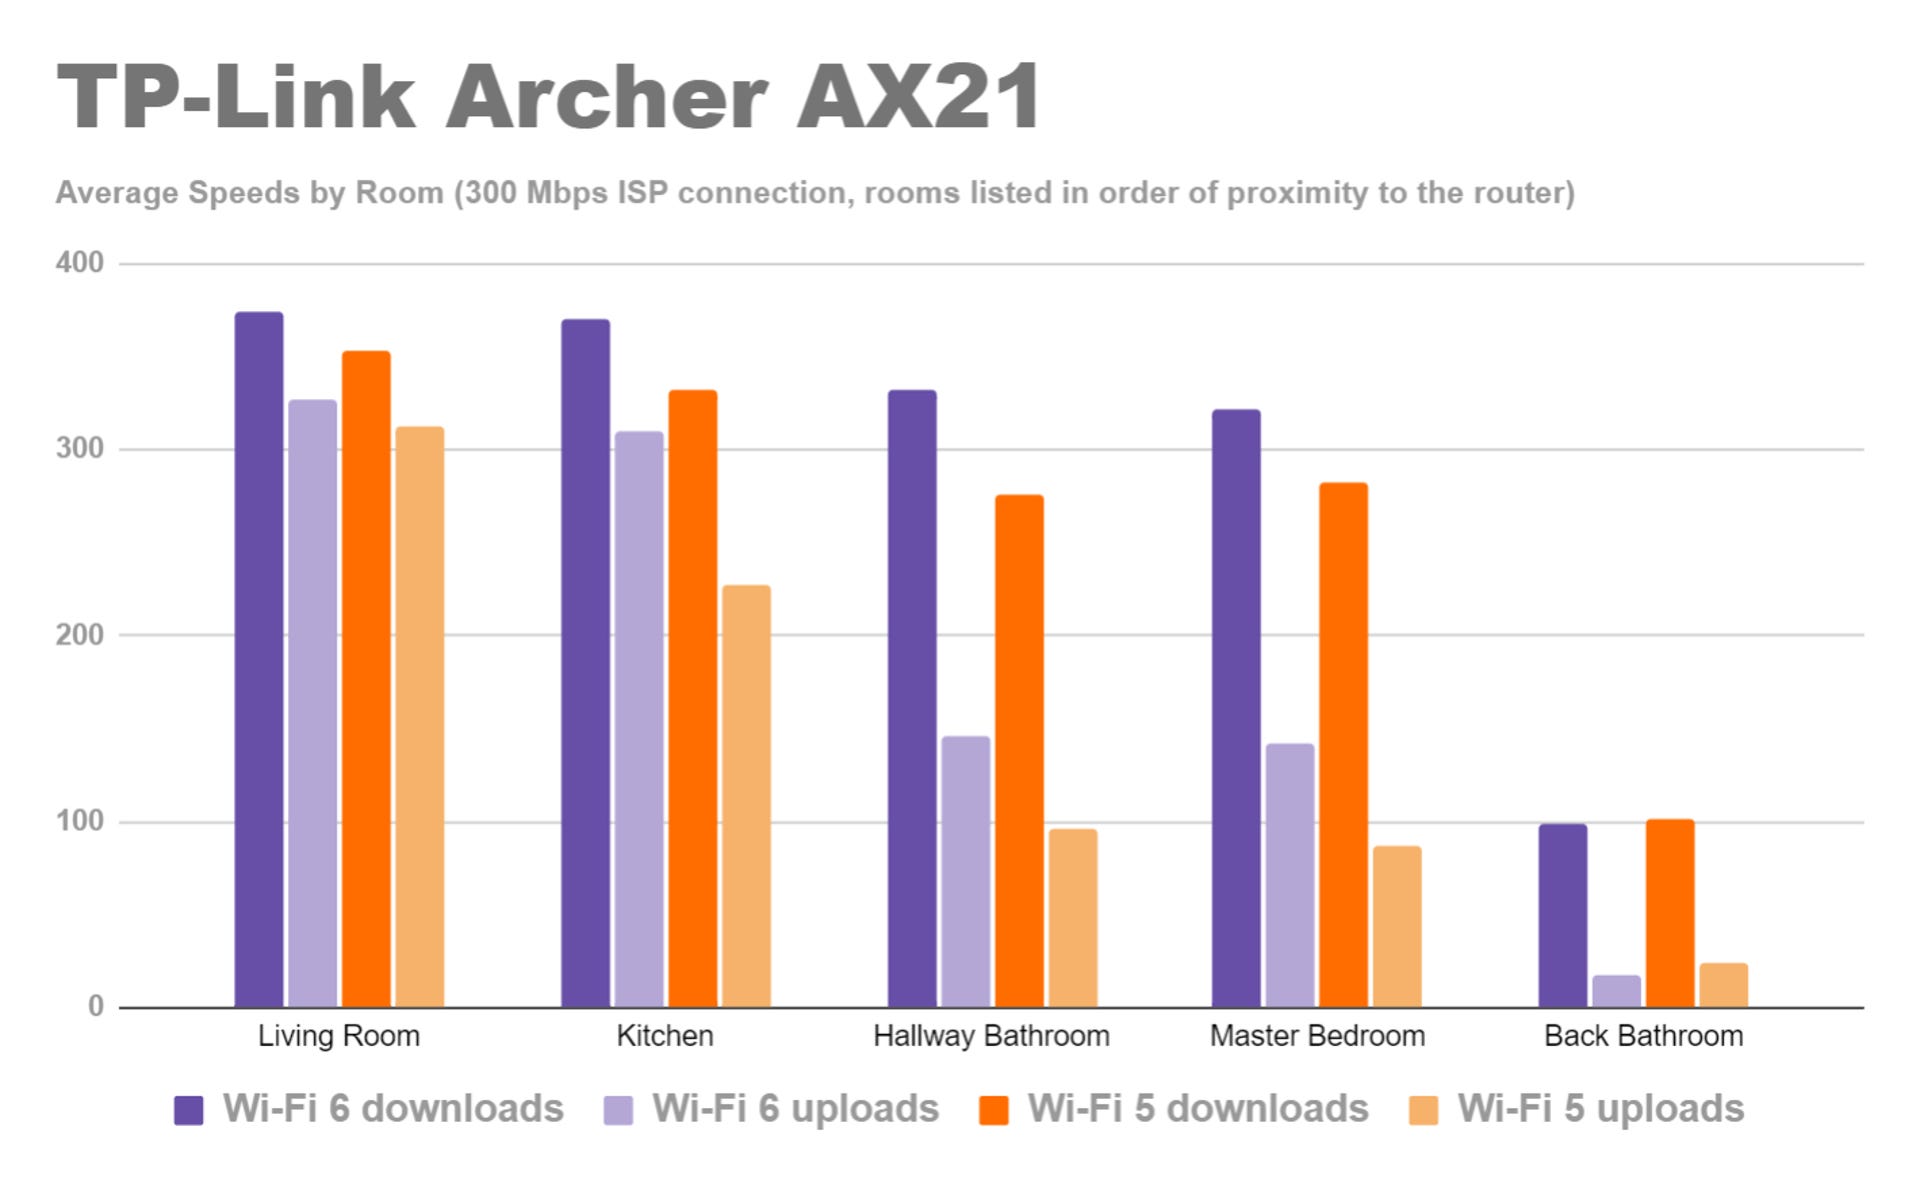 Performance comparison chart measuring average download speeds for TP-Link Archer AX21 vs. two other budget routers using Wi-Fi 5 and Wi-Fi 6